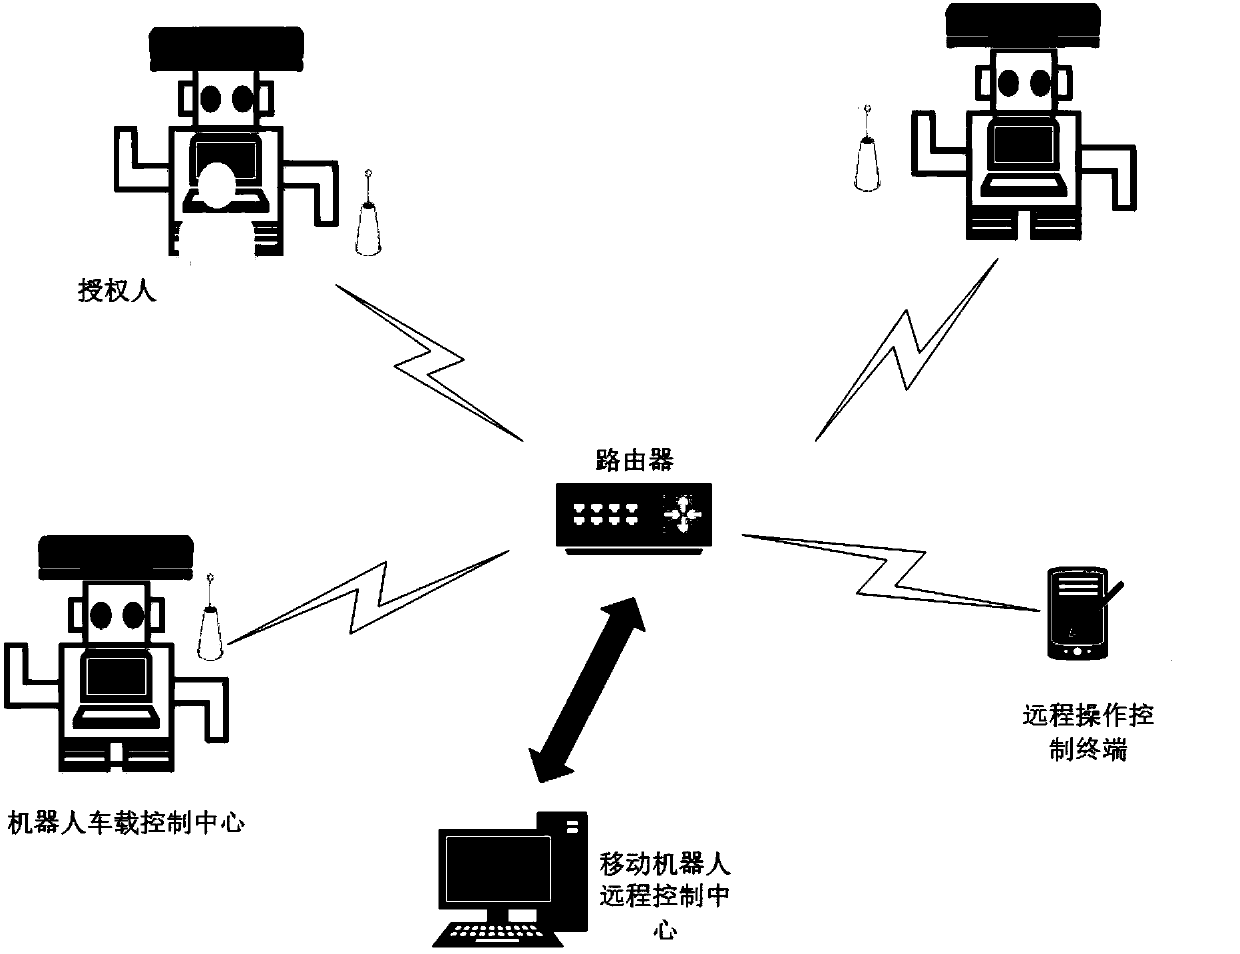 Man-Machine Control System of Mobile Robot Based on Face Position and Sensitivity Parameters